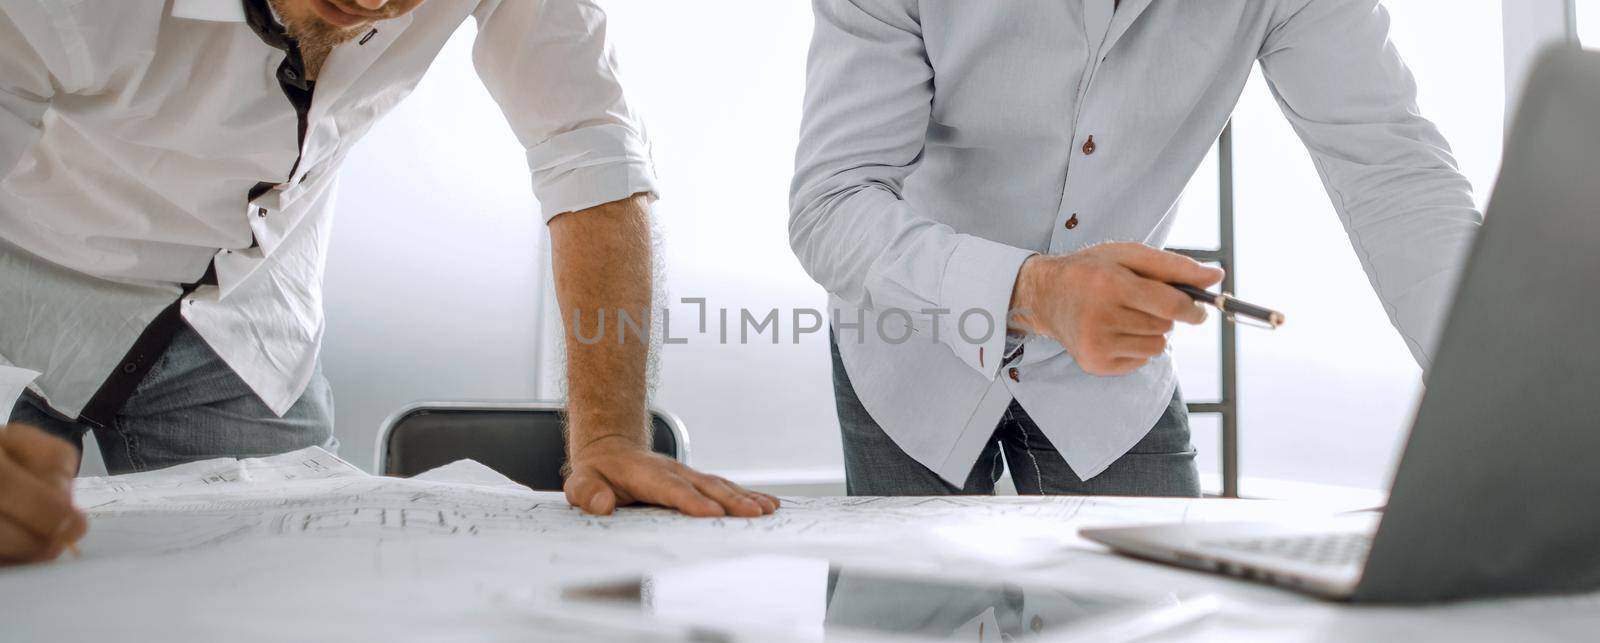 two architects use a laptop for work. photo with copy space